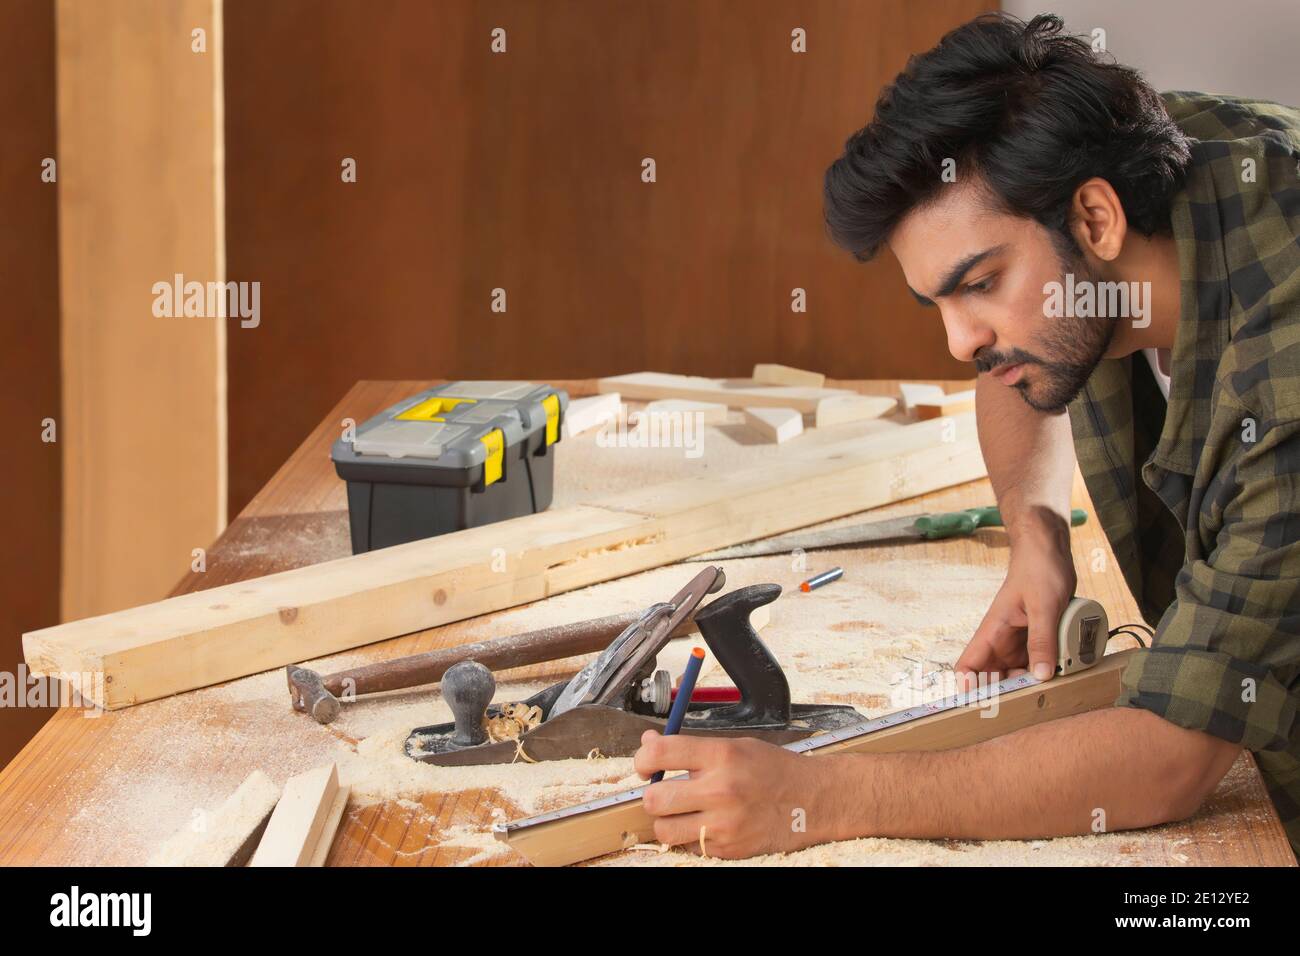 A YOUNG CARPENTER CAREFULLY MEASURING WOOD AND WORKING Stock Photo